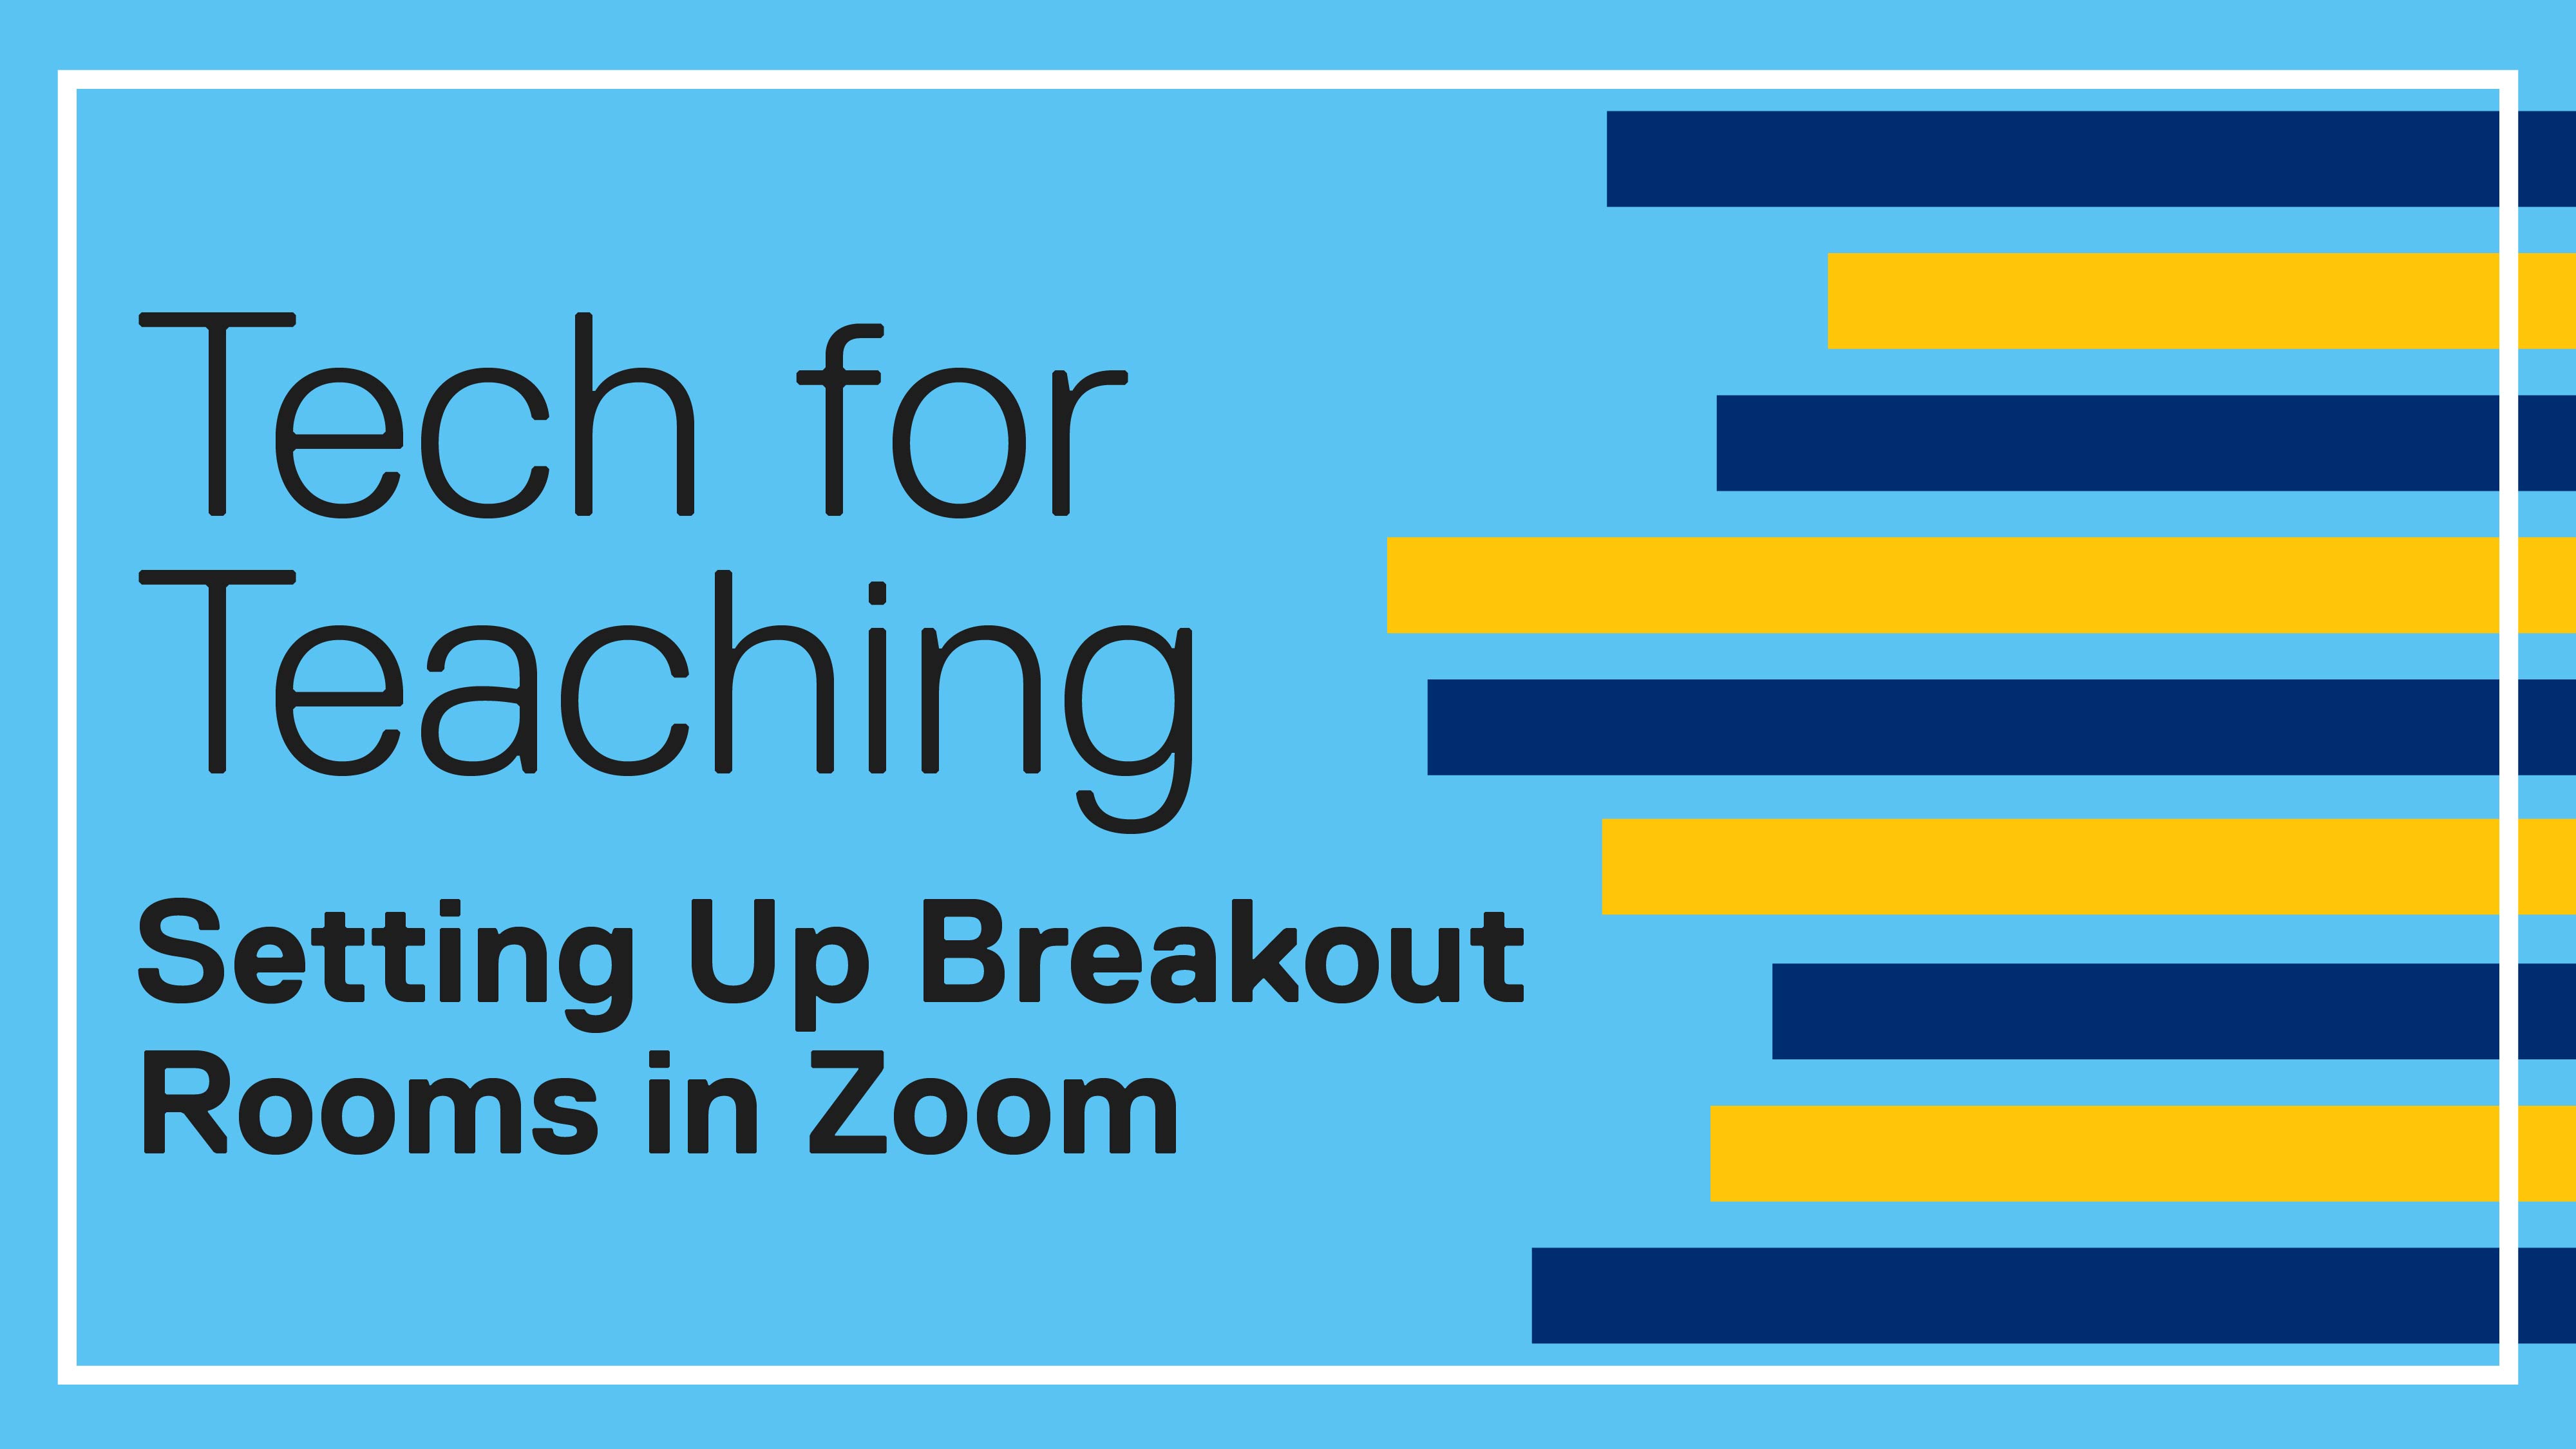 Tech for Teaching: Setting Up Breakout Rooms in Zoom